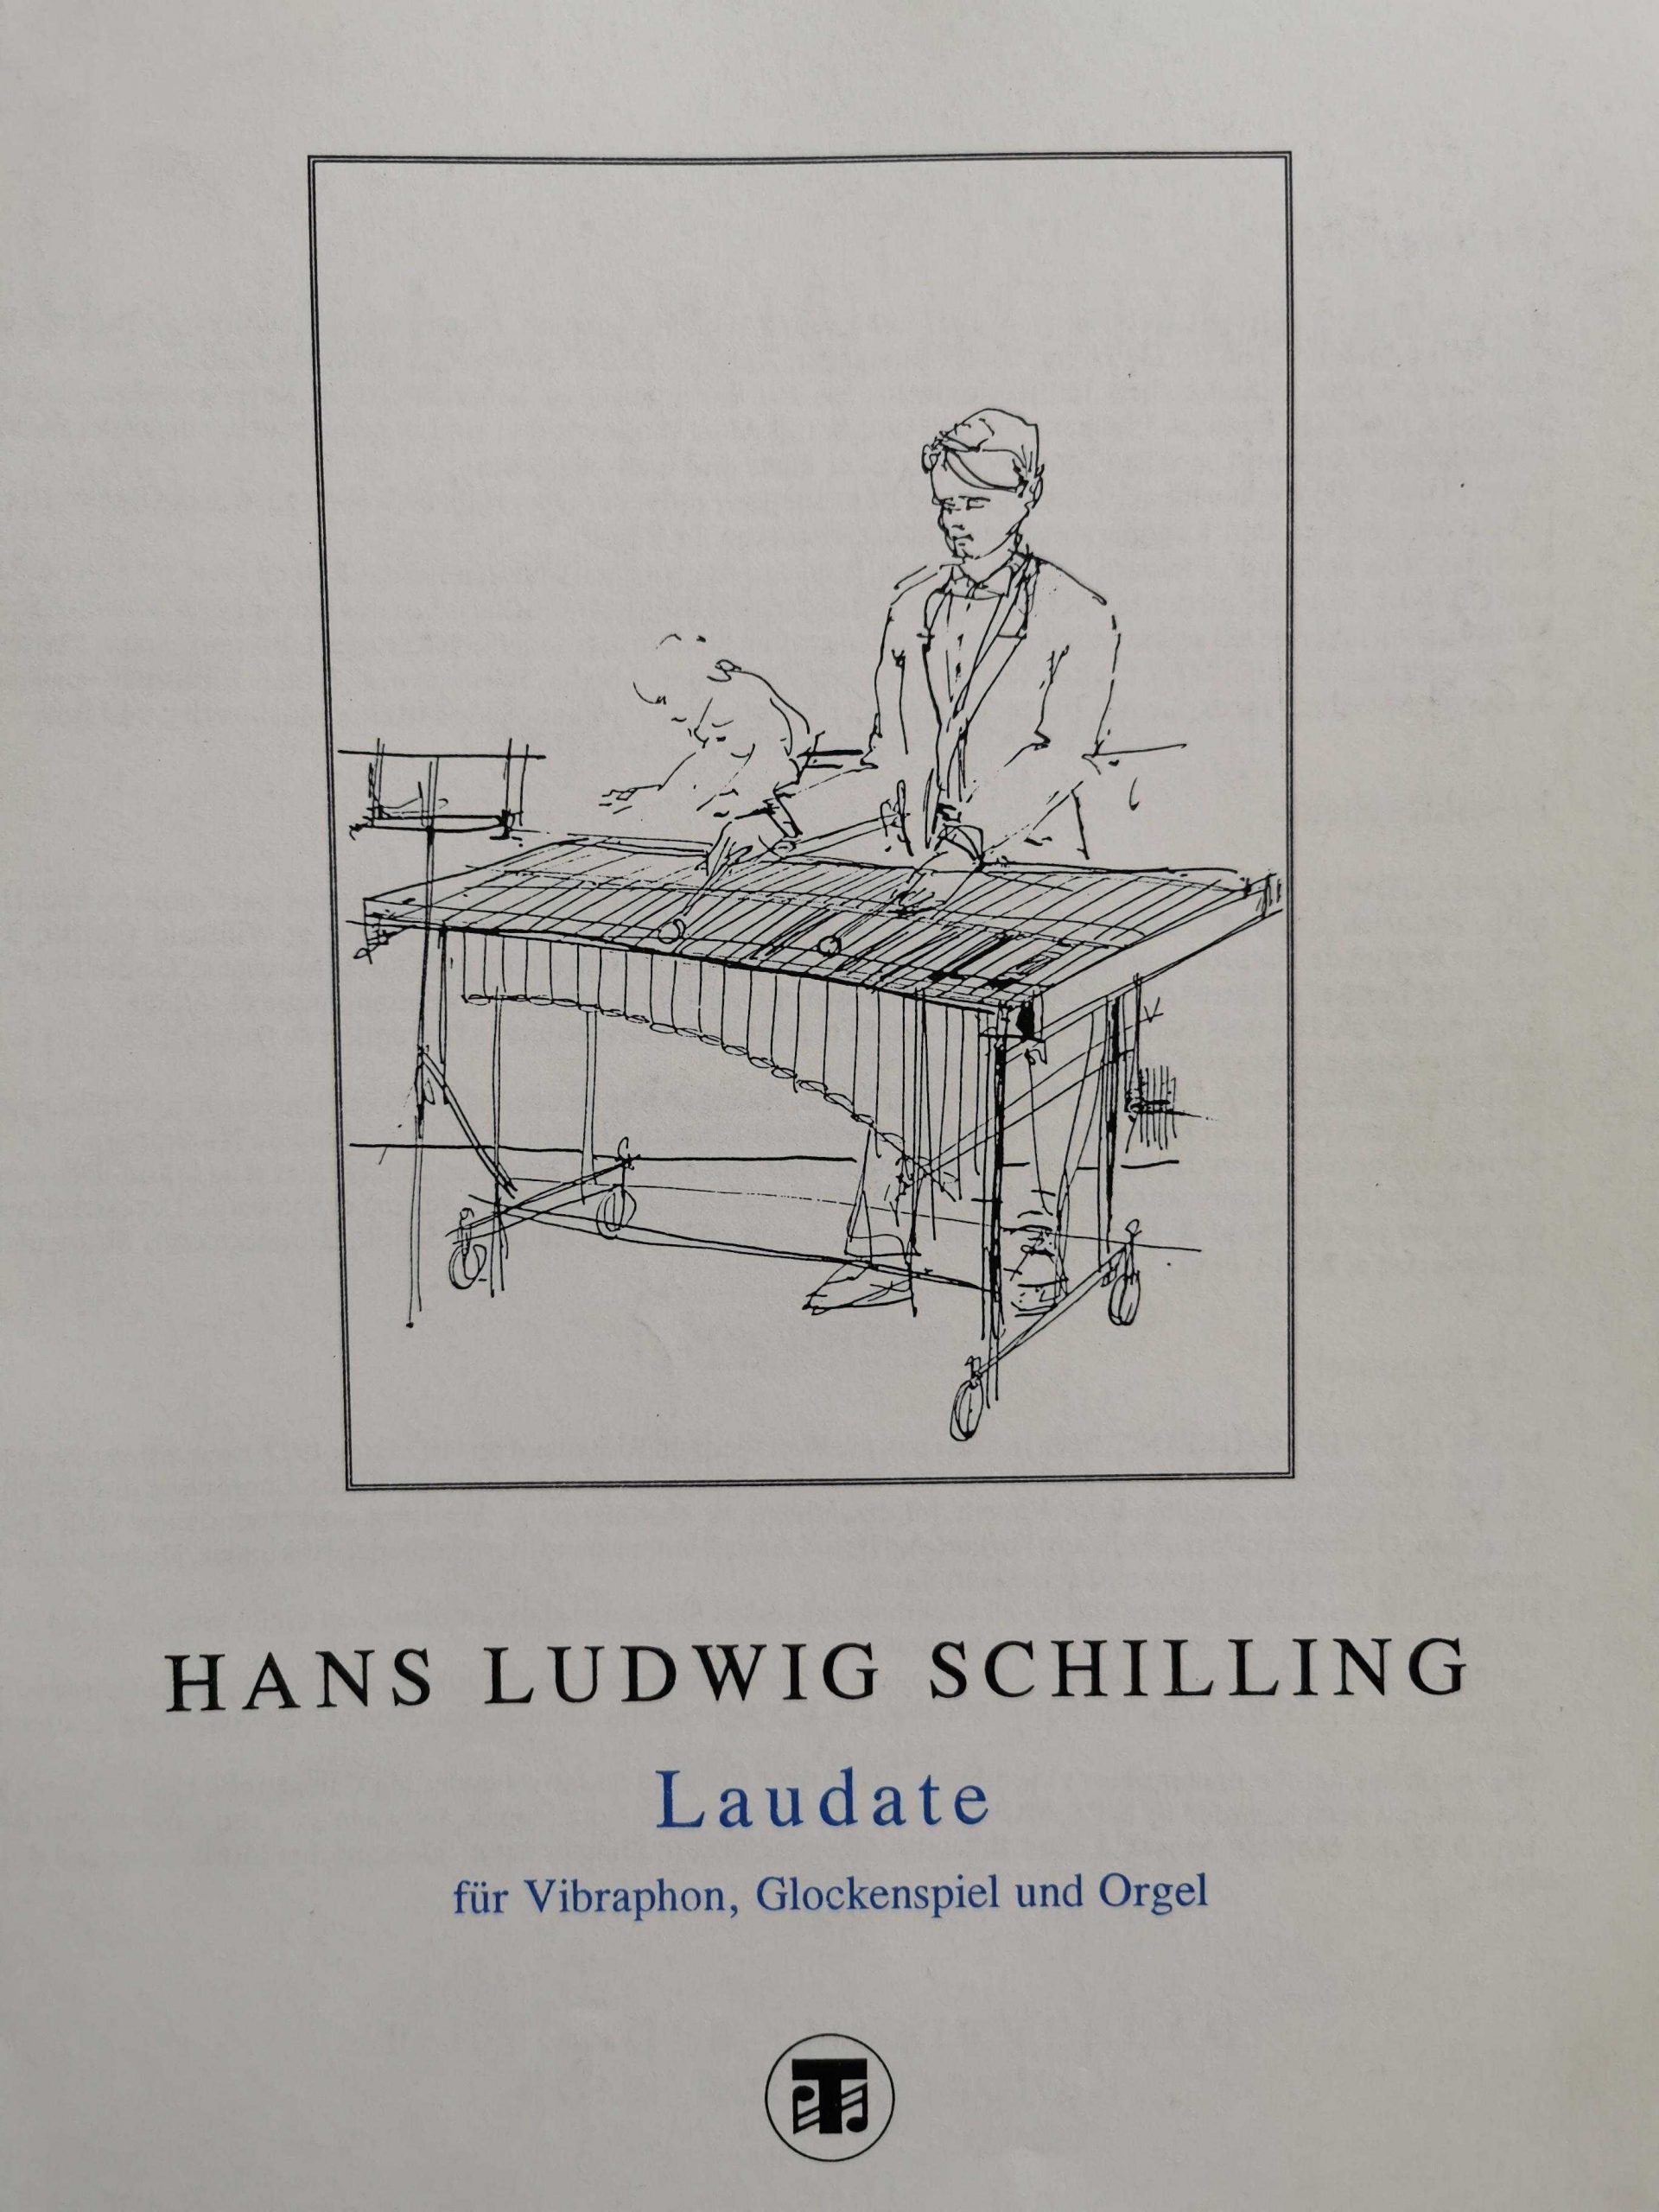 Laudate by Hans Ludwig Schilling